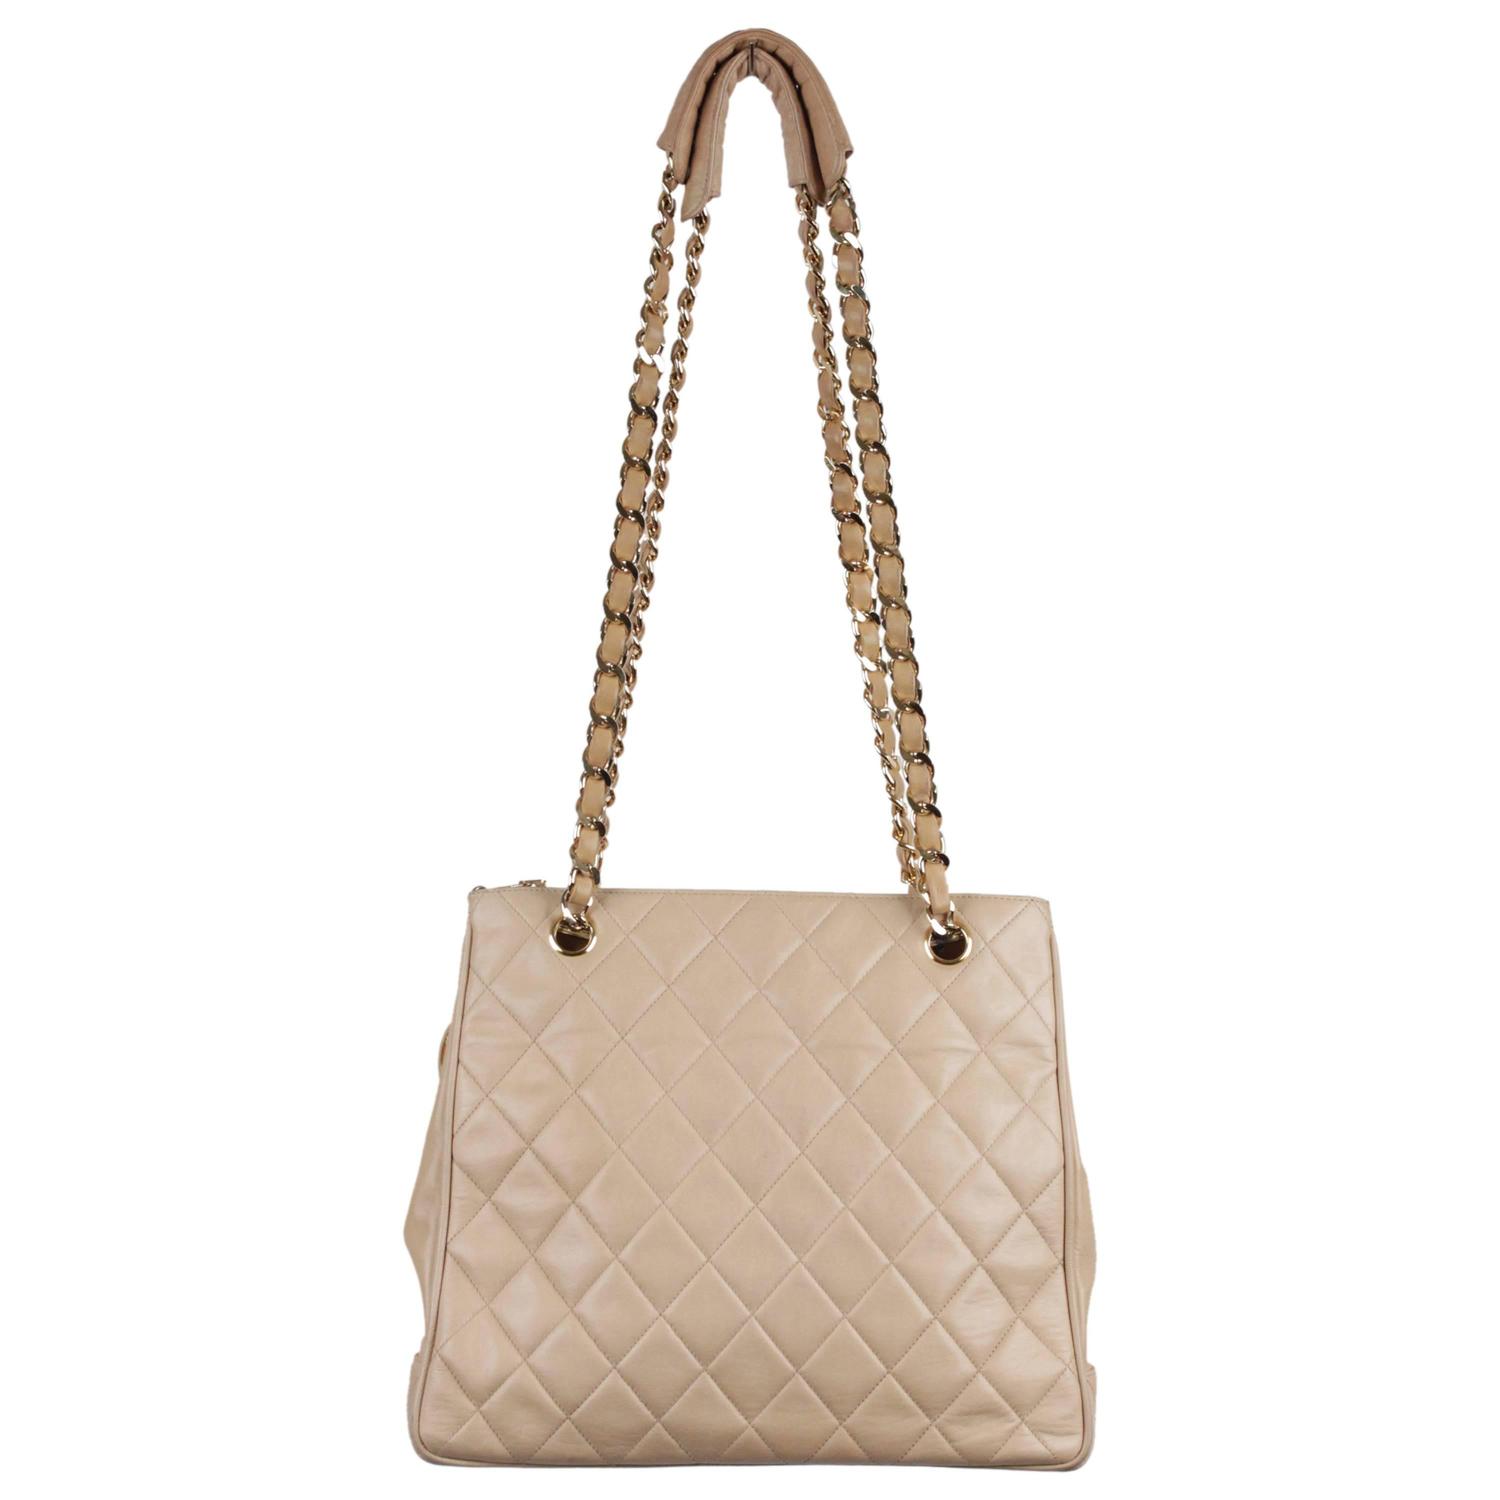 CHANEL Vintage Beige QUILTED Leather TOTE Shoulder Bag w/ Chain Strap For Sale at 1stdibs